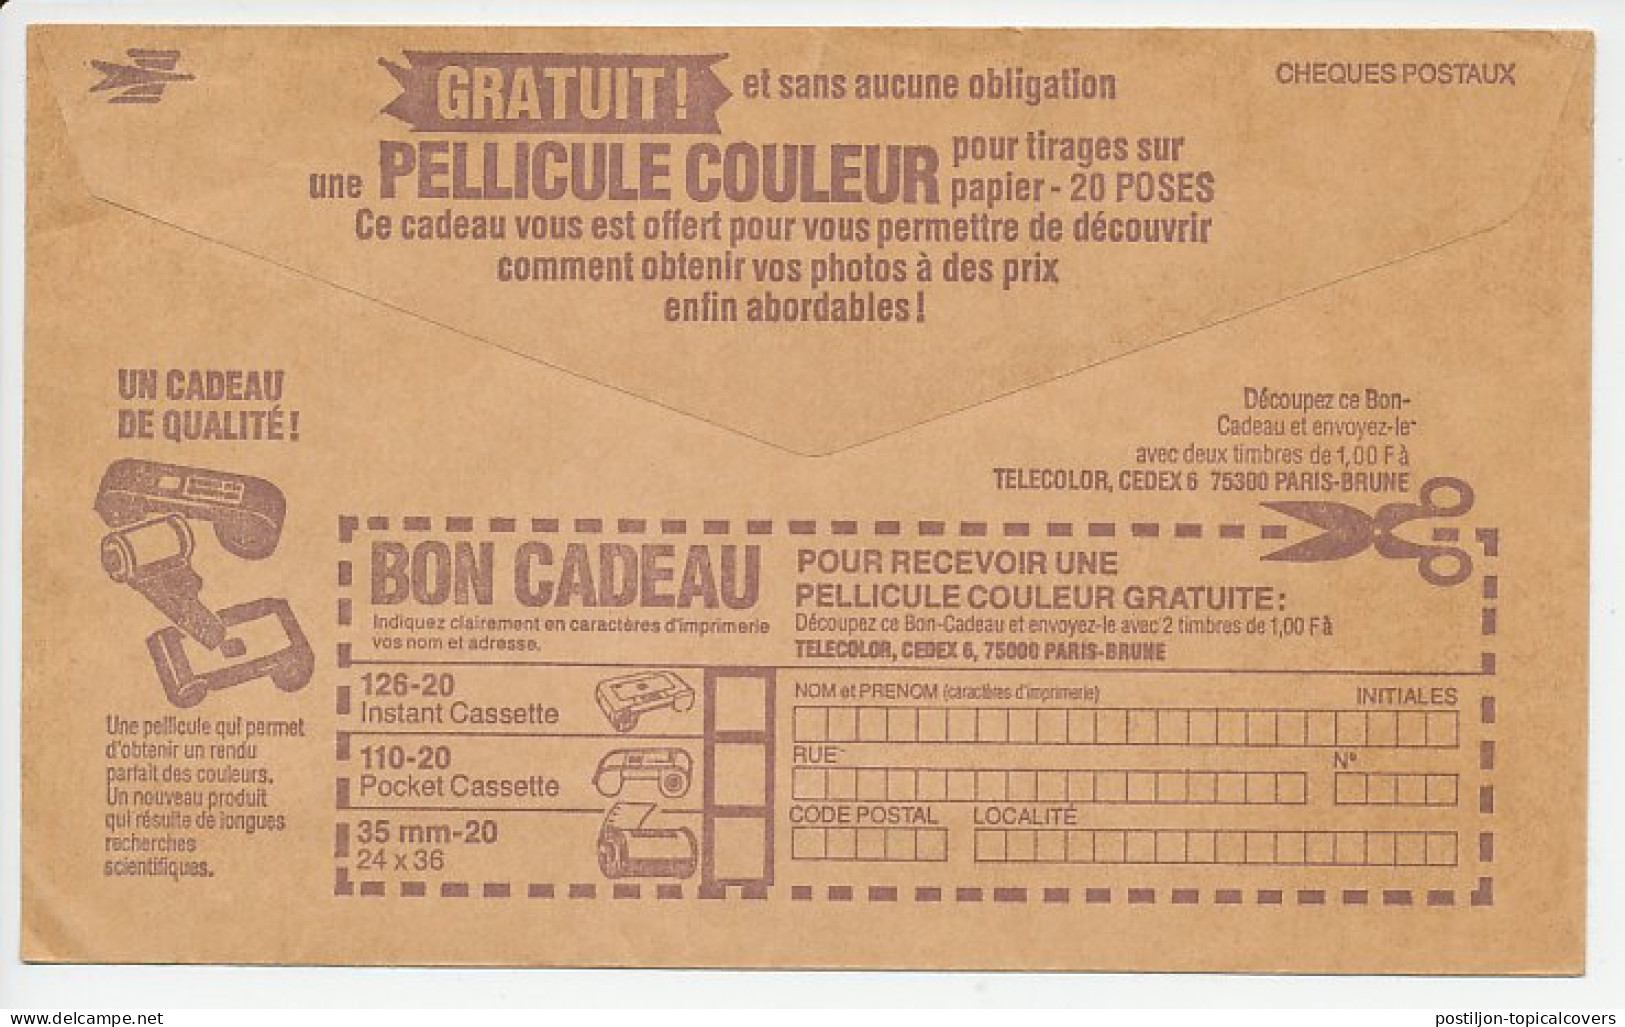 Postal Cheque Cover France Photographic Film - Photographie